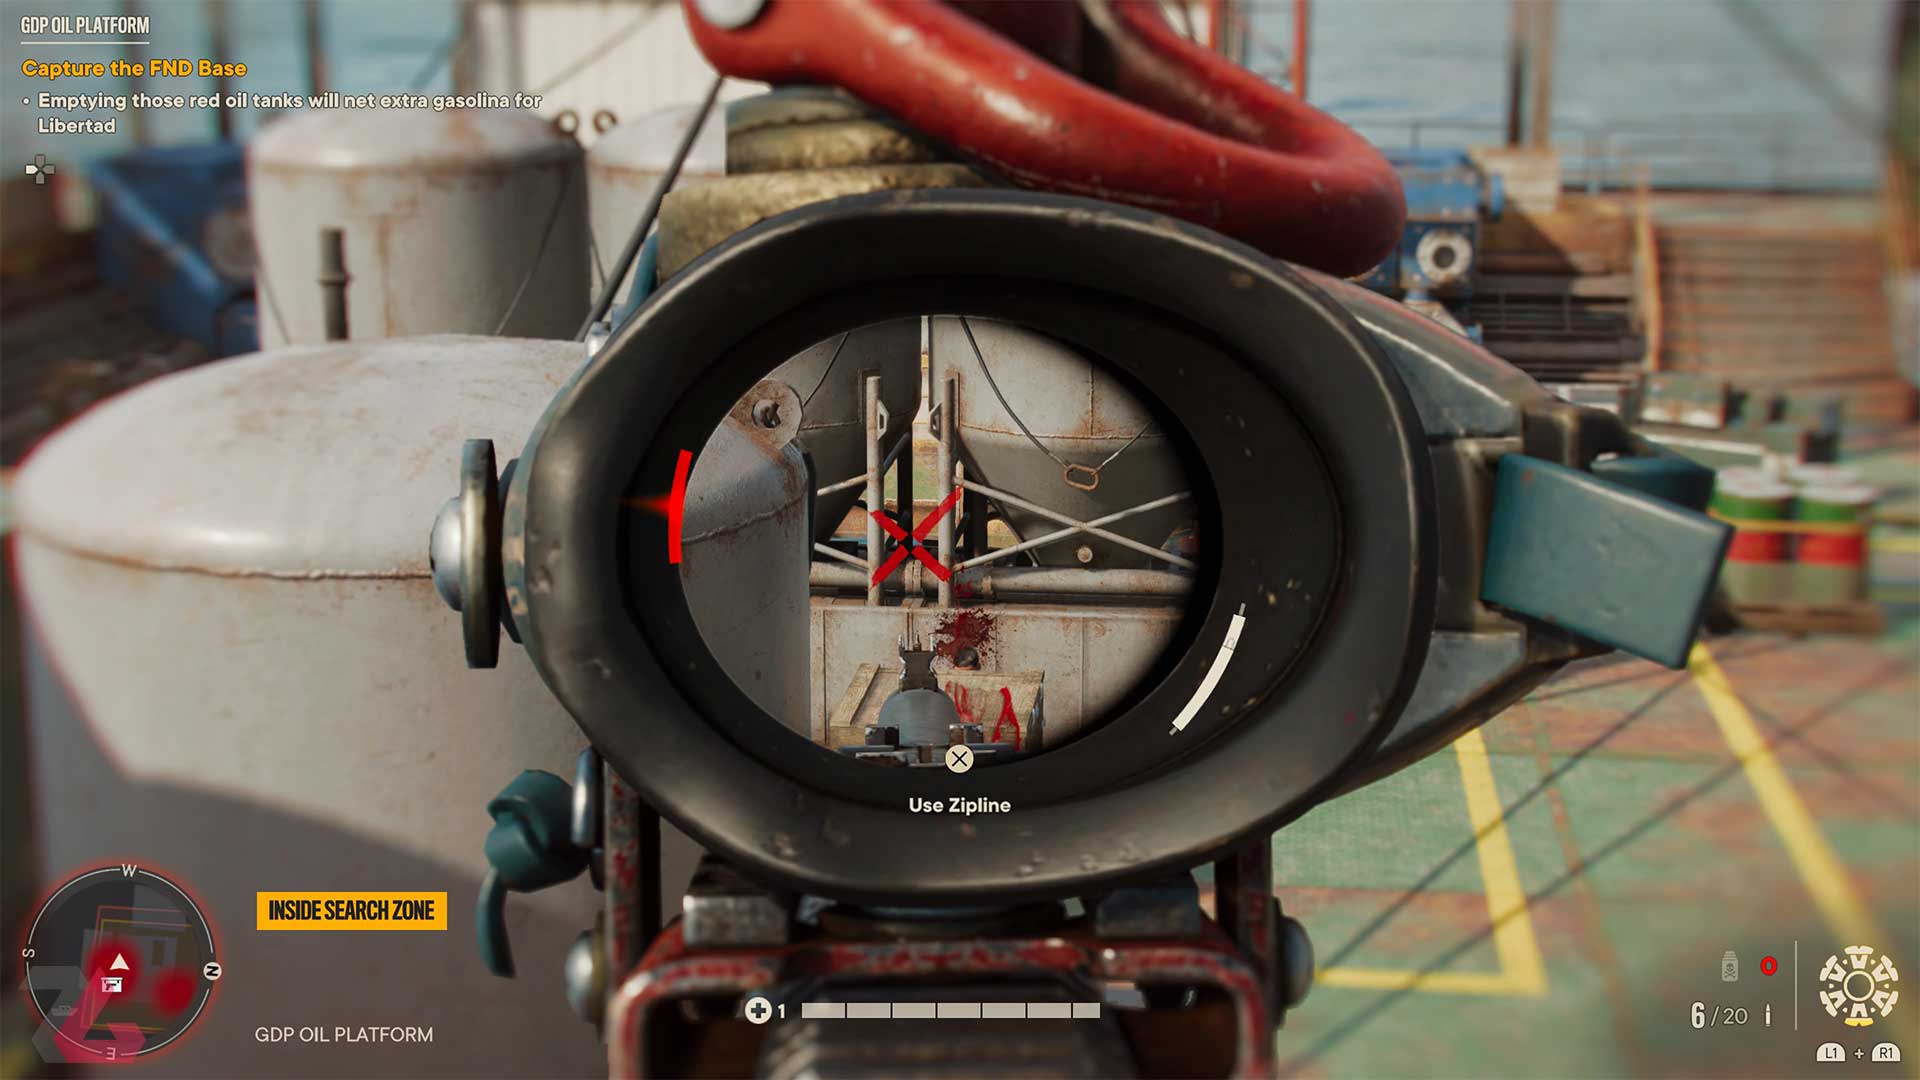 Shoot with a sniper on the oil rig in Ubisoft Far Cry 6